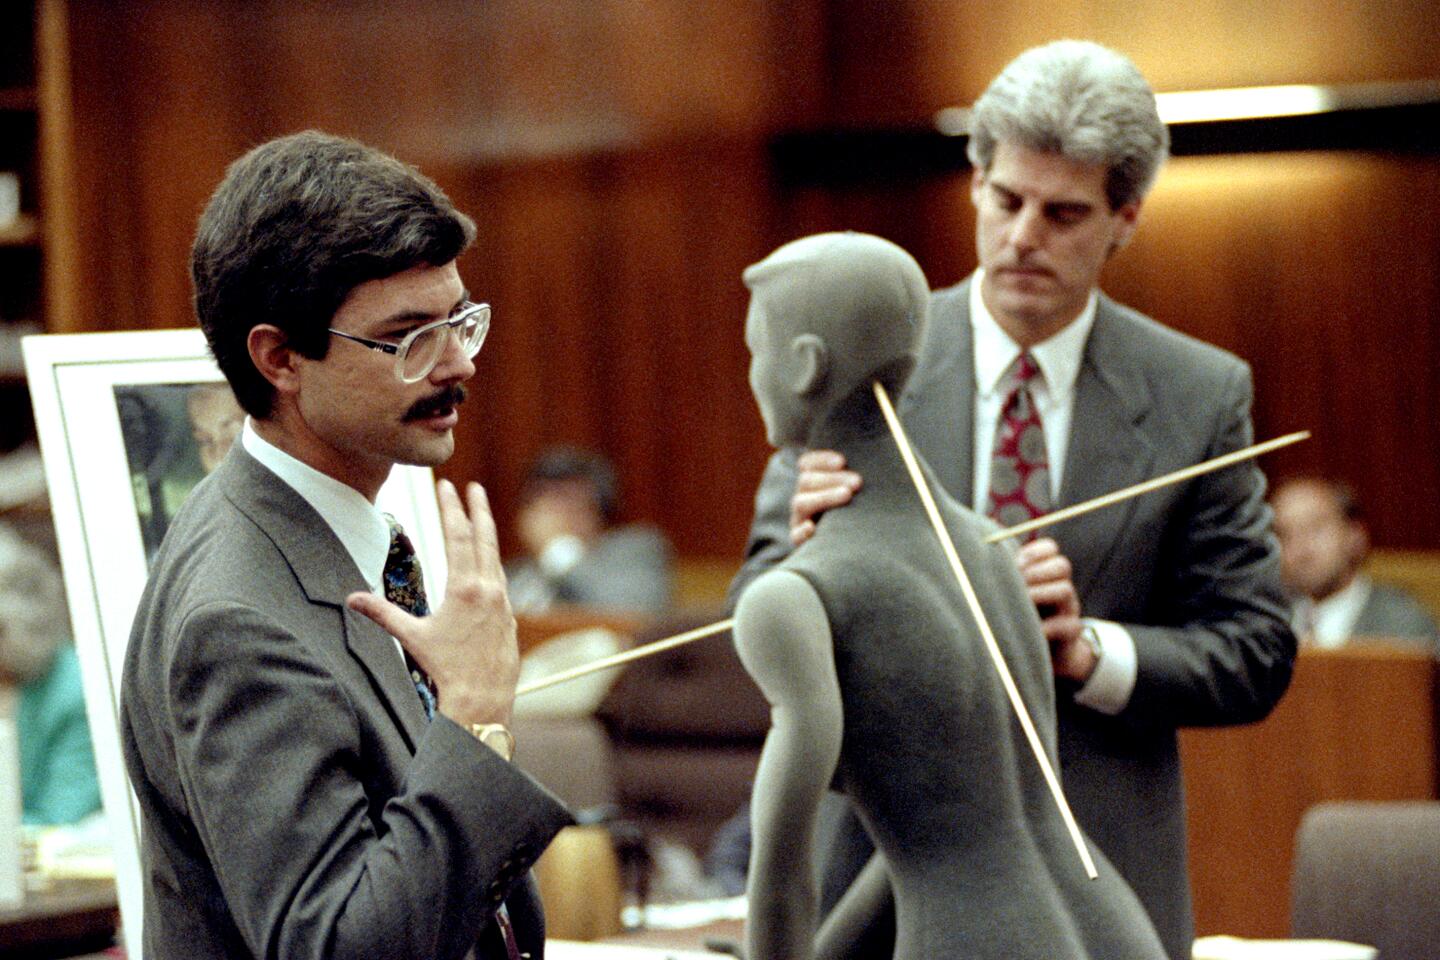 Medical Examiner Christopher Swalwell, left, shows the path of bullets that killed Linda Broderick as prosecutor Paul Burakoff looks on in Betty Broderick's retrial on Oct. 16, 1991.